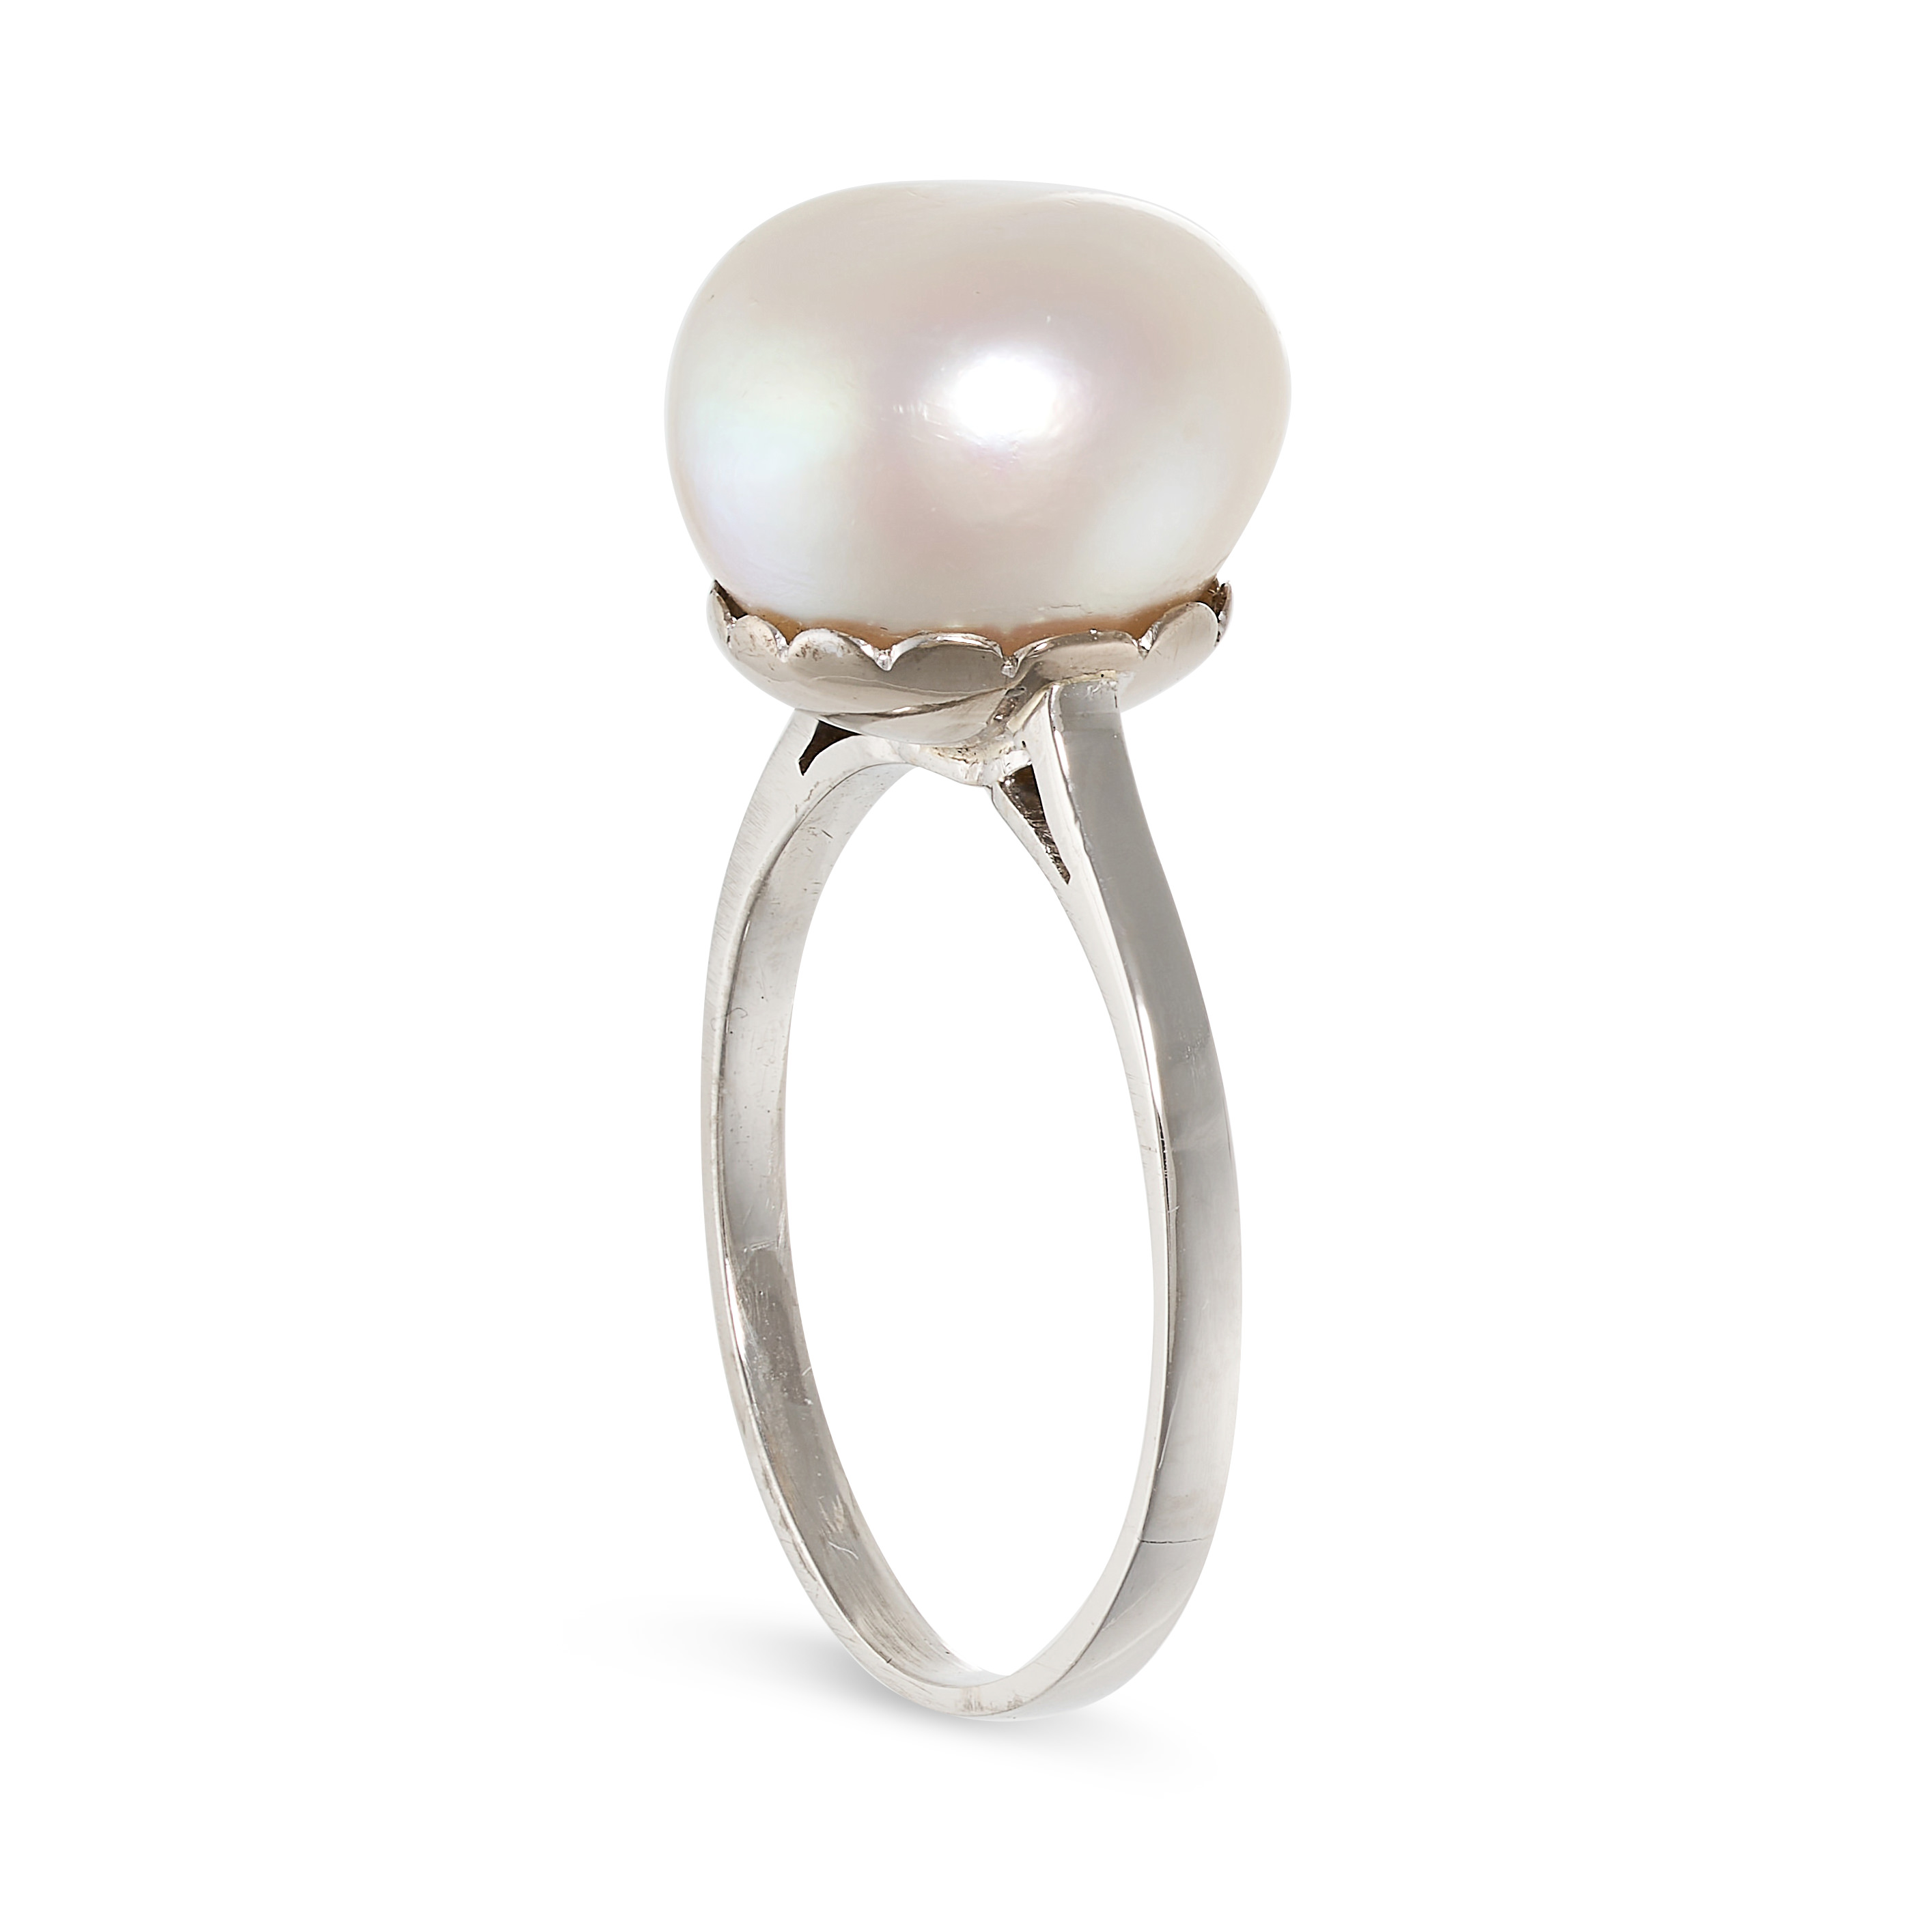 A PEARL RING set with a pearl of 11.3mm, no assay marks, size M / 6, 4.1g. - Image 2 of 2